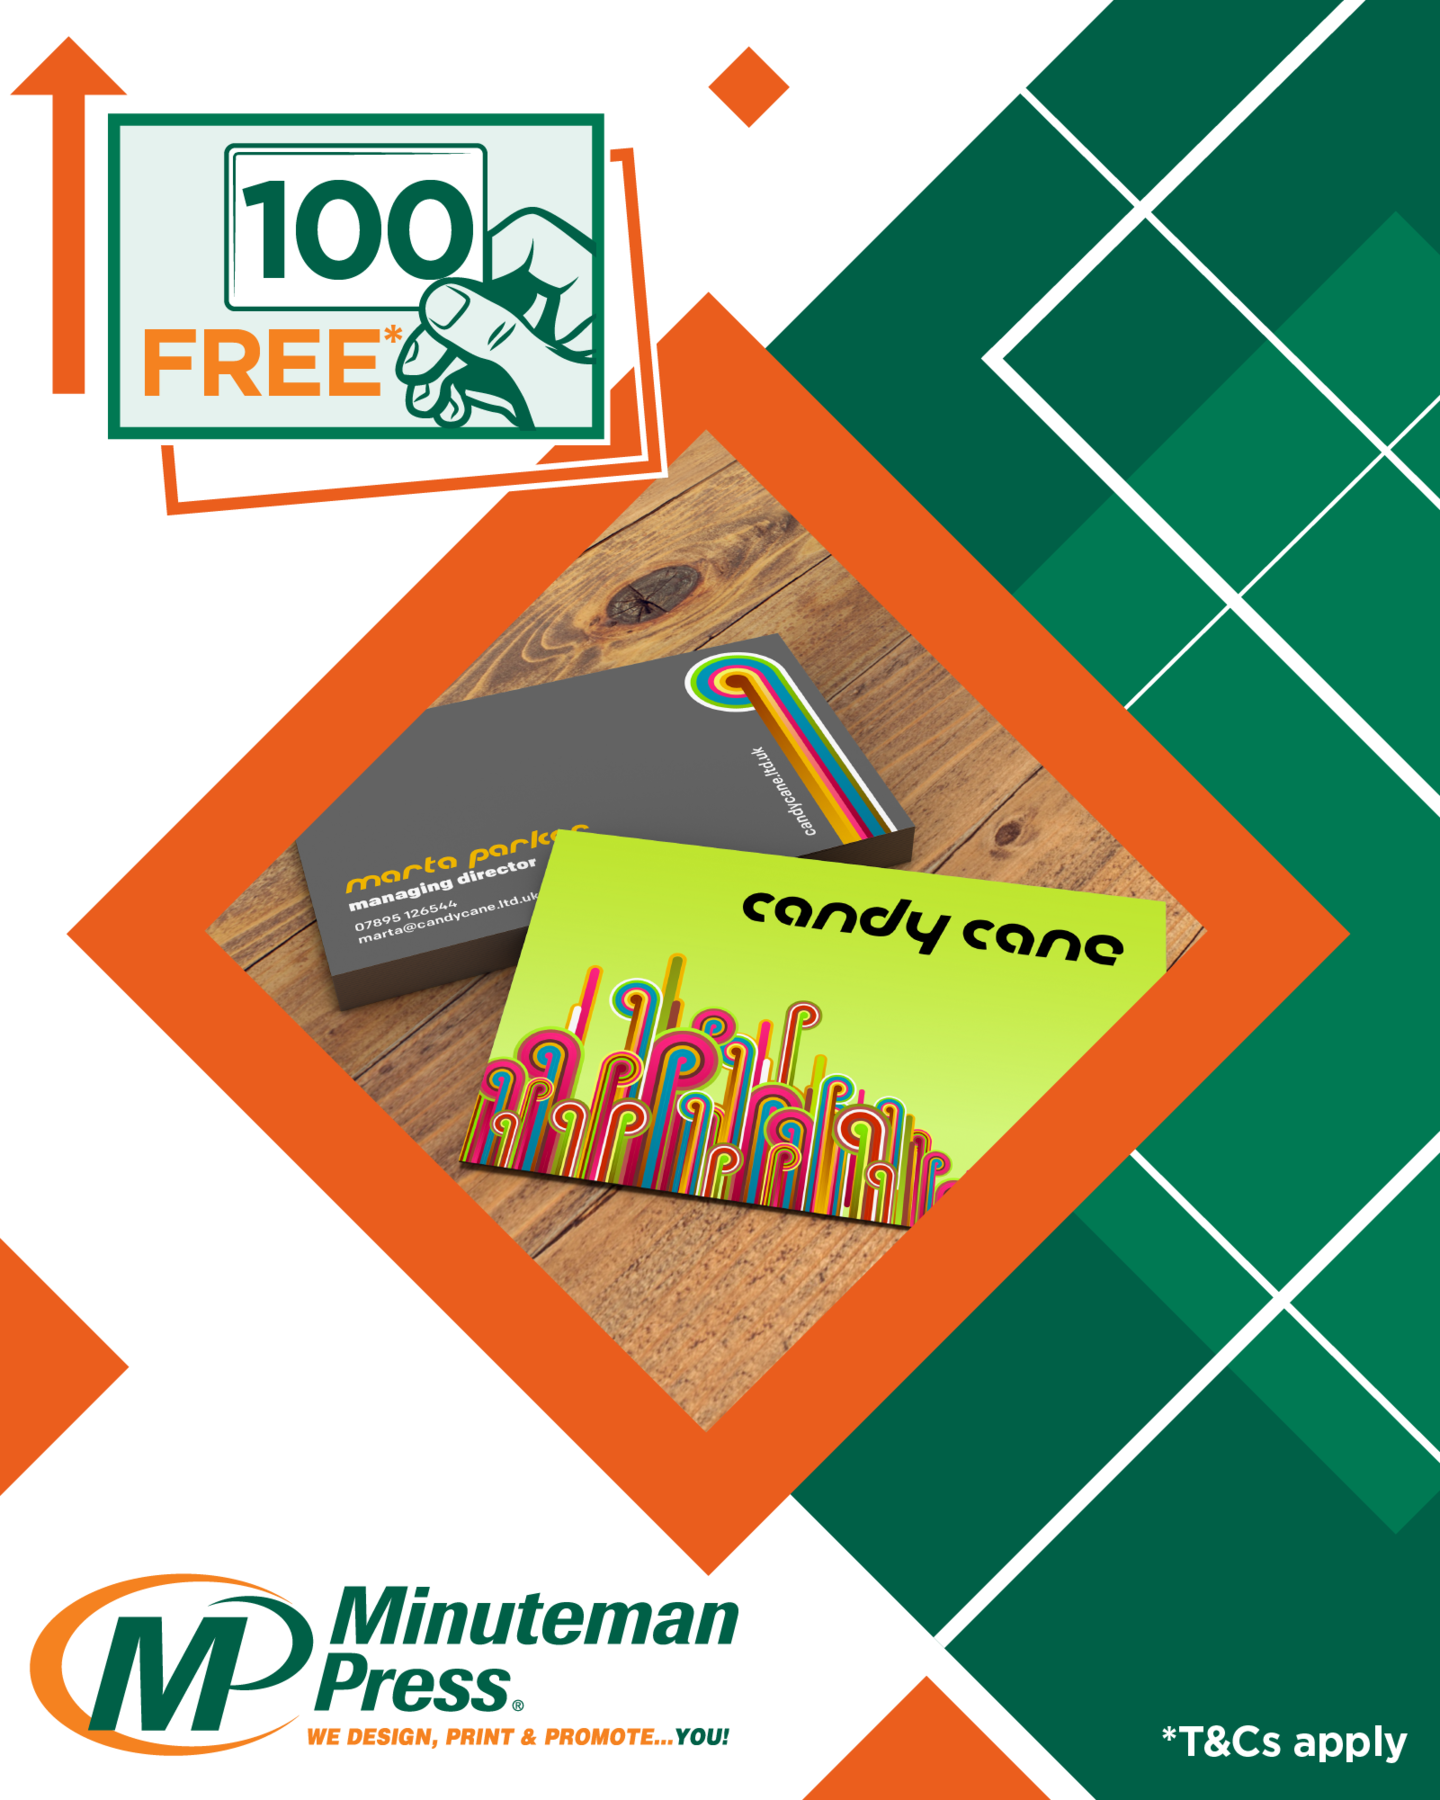 Minuteman Press help businesses bounce back with free business cards